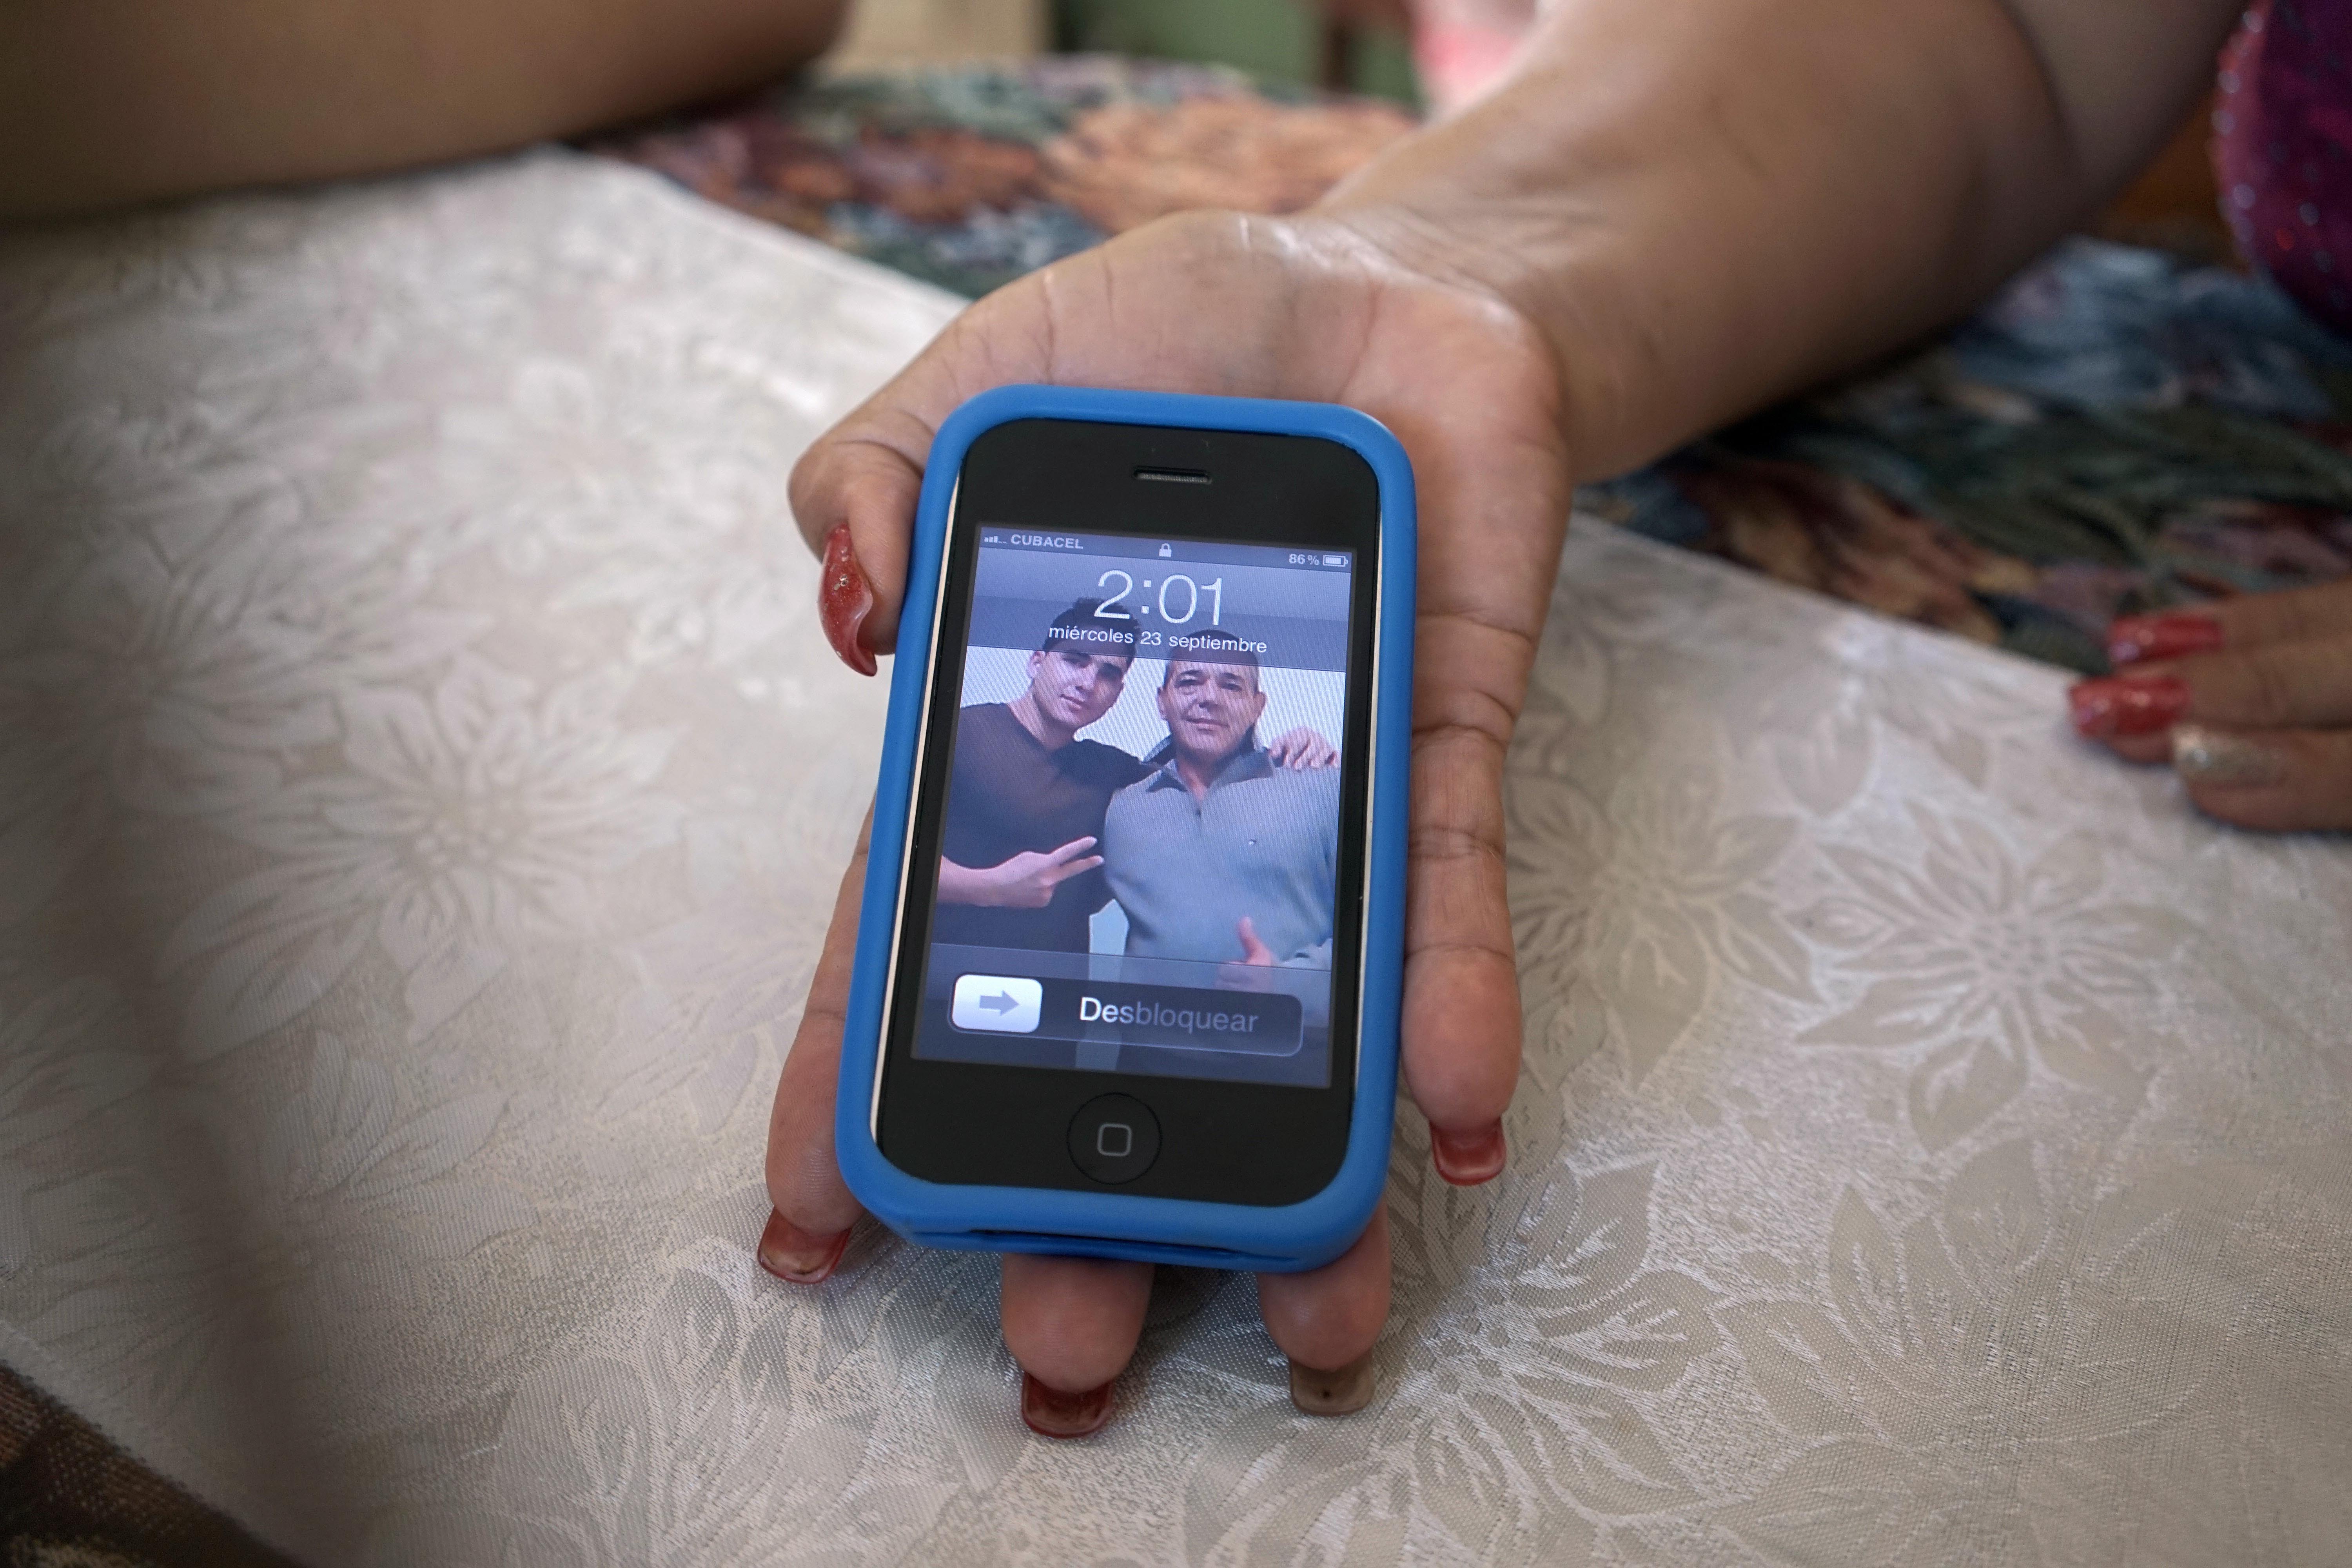 Olea Lastre, a hairdresser, shows a photo of her husband Antonio Cardenas with her son Jose Fuentes Lastre, taken in the US after they survived 10 days at sea on a raft in the Florida Straits, on her cell phone in Camaguey, Cuba. Photo: AP/ File